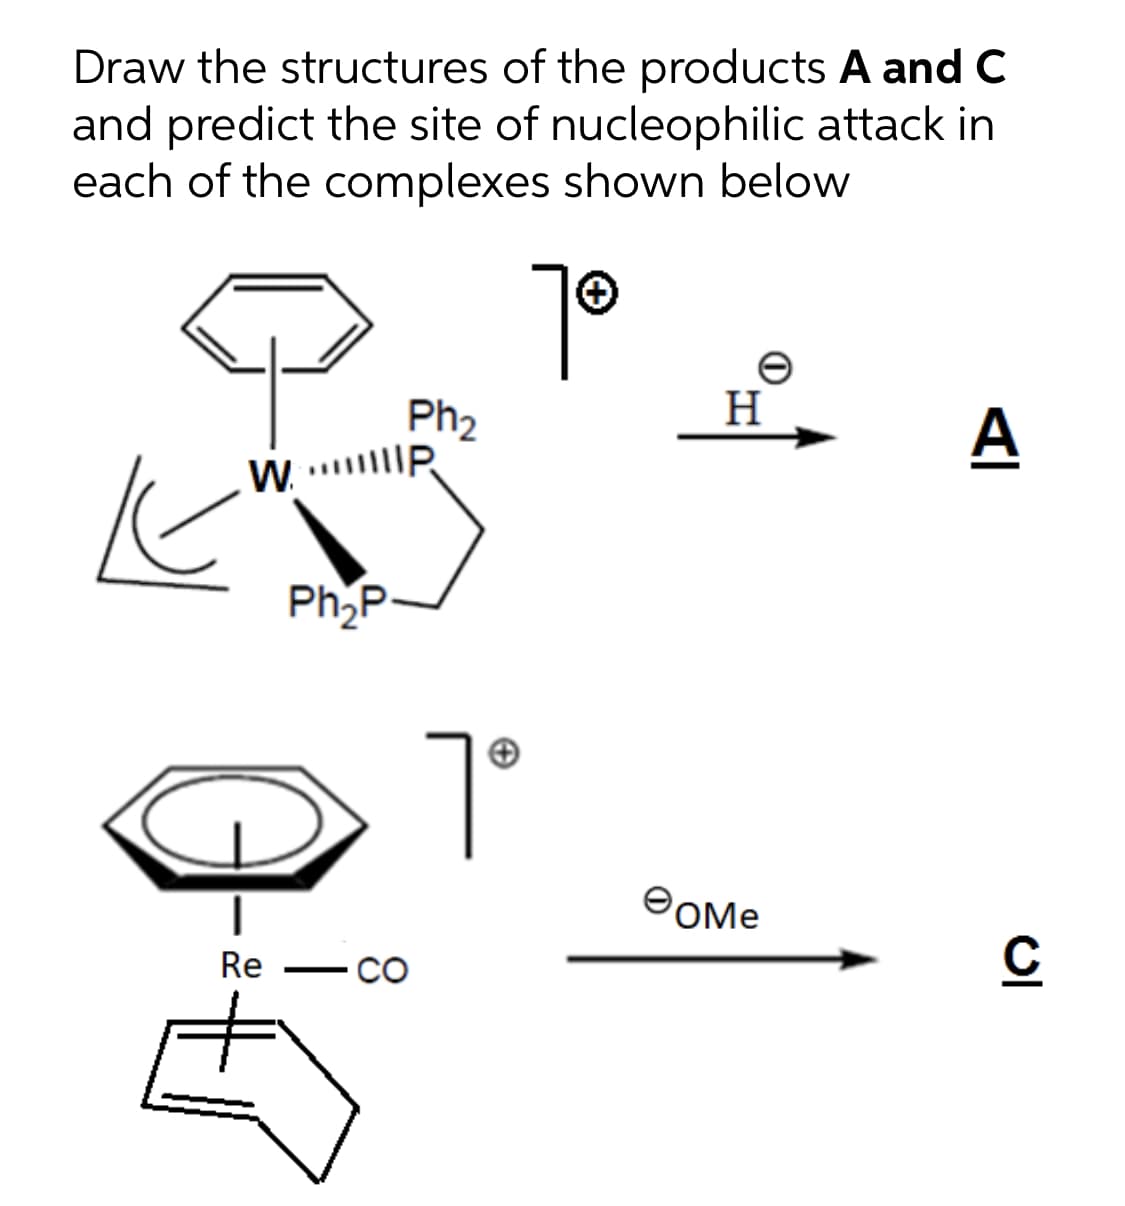 Draw the structures of the products A and C
and predict the site of nucleophilic attack in
each of the complexes shown below
Ph2
H
A
W. . P
Ph,P
7°
POME
Re
Co
